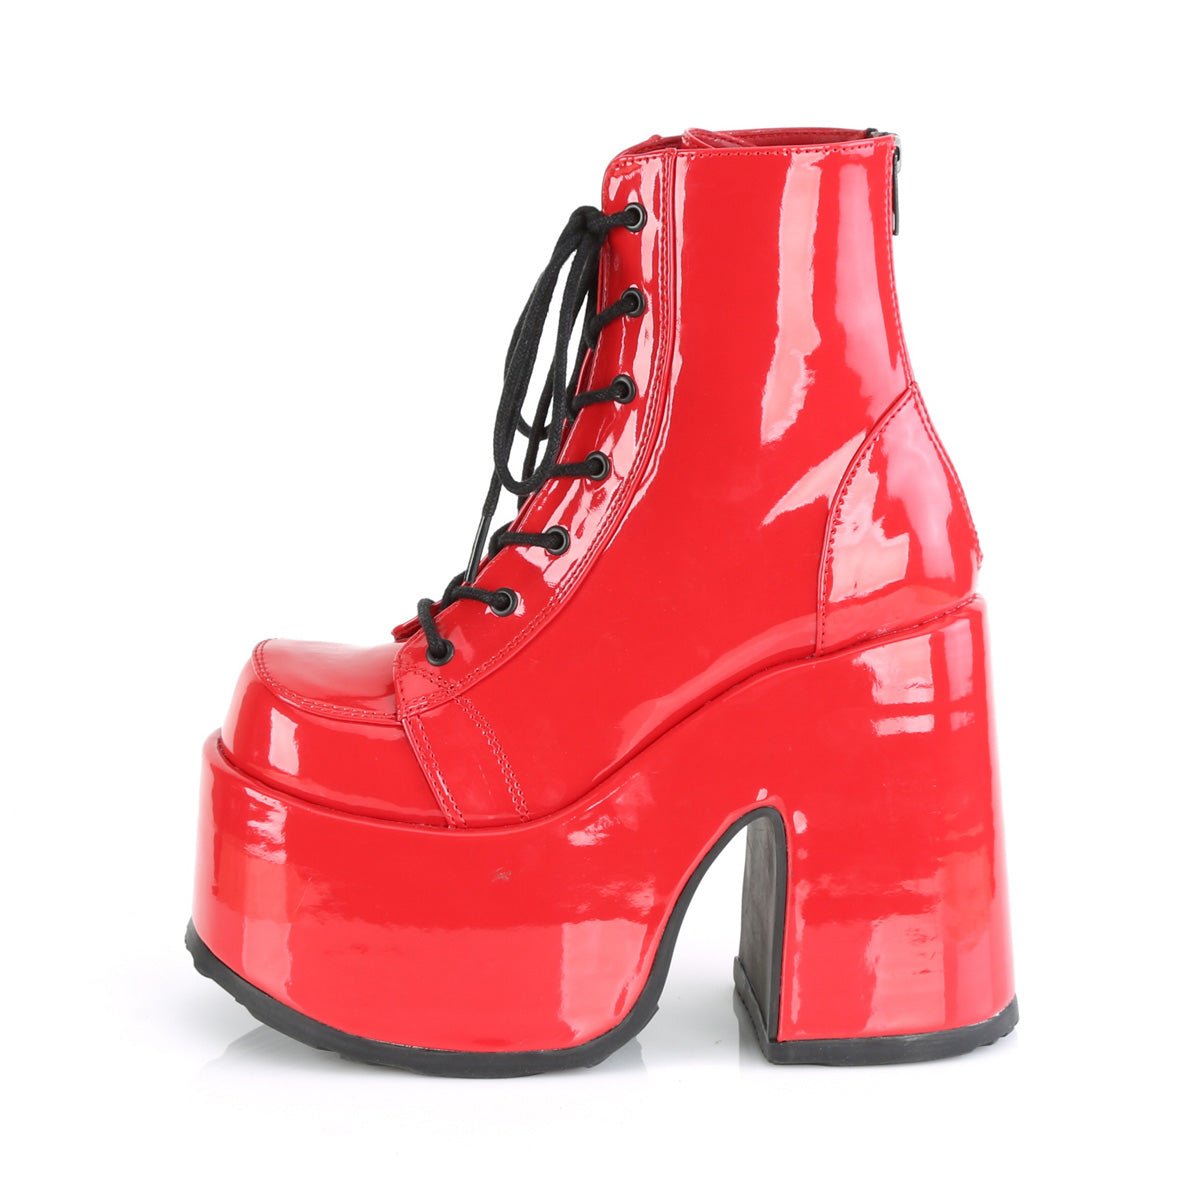 Too Fast | Demonia Camel 203 | Red Patent Leather Women's Ankle Boots